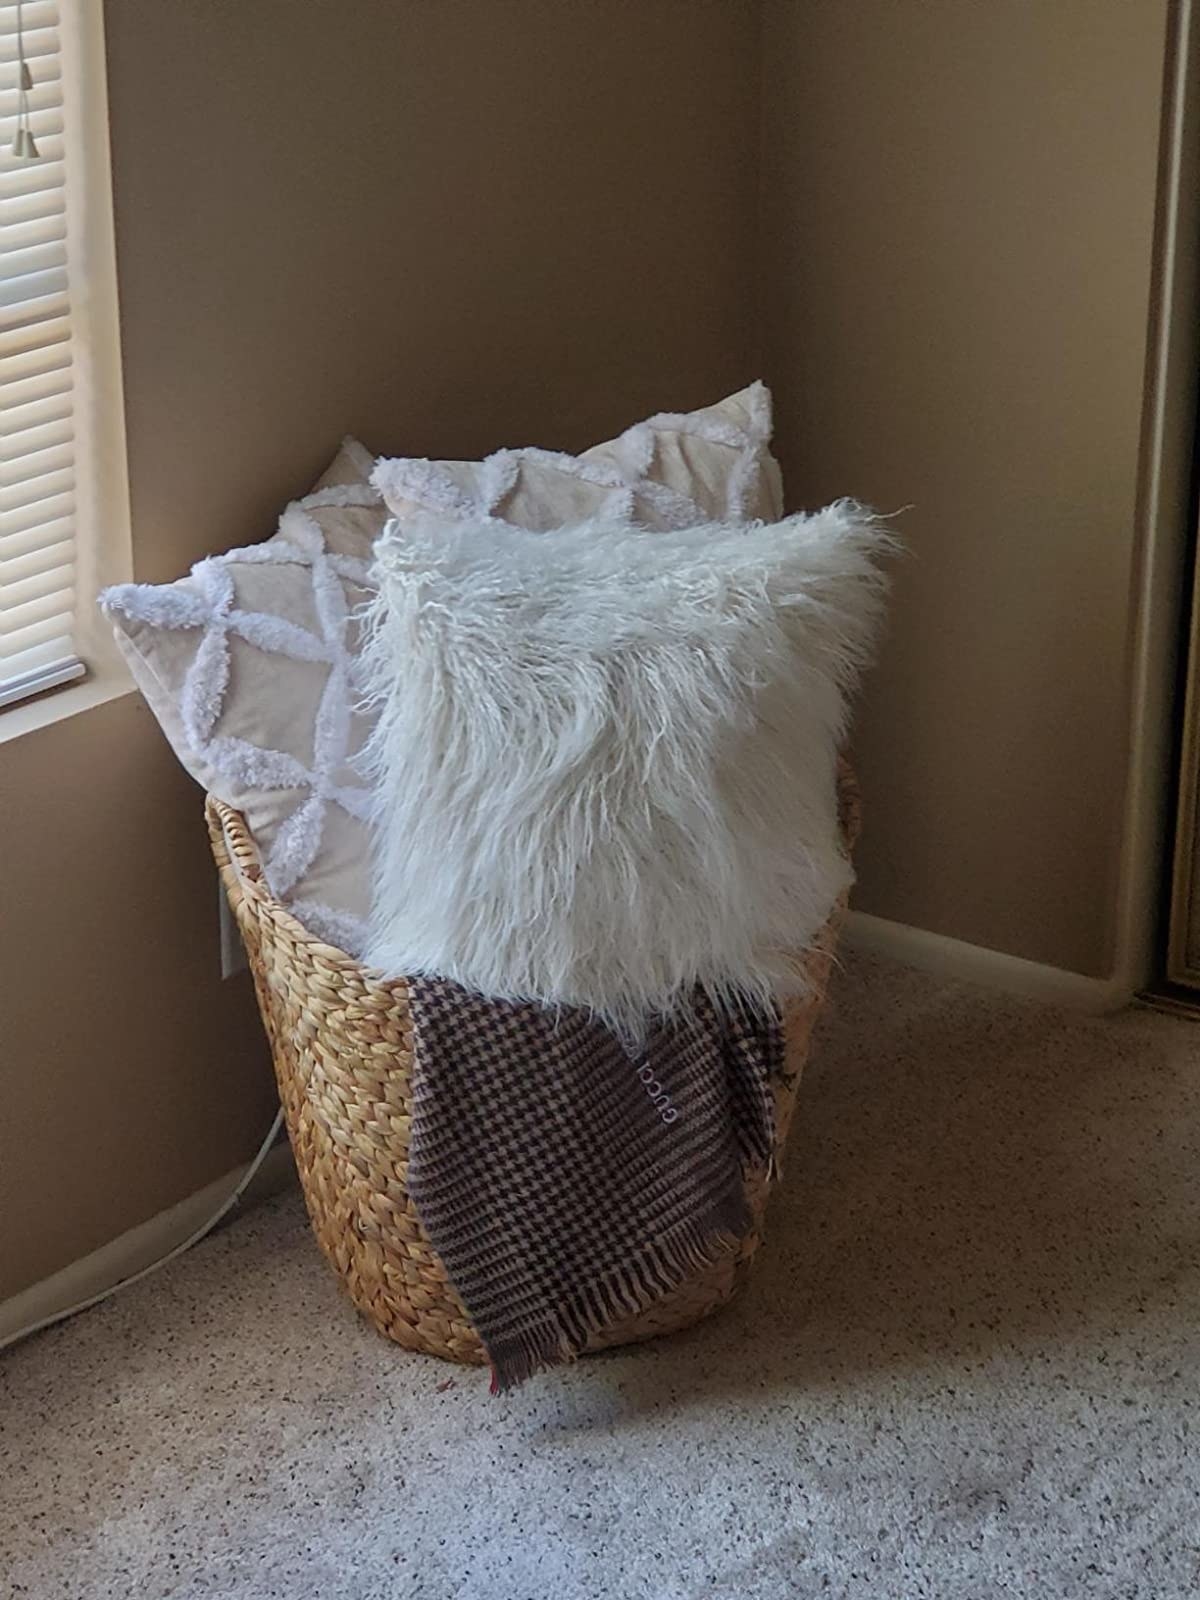 Woven floor basket holding white throw pillows and brown throw blanket